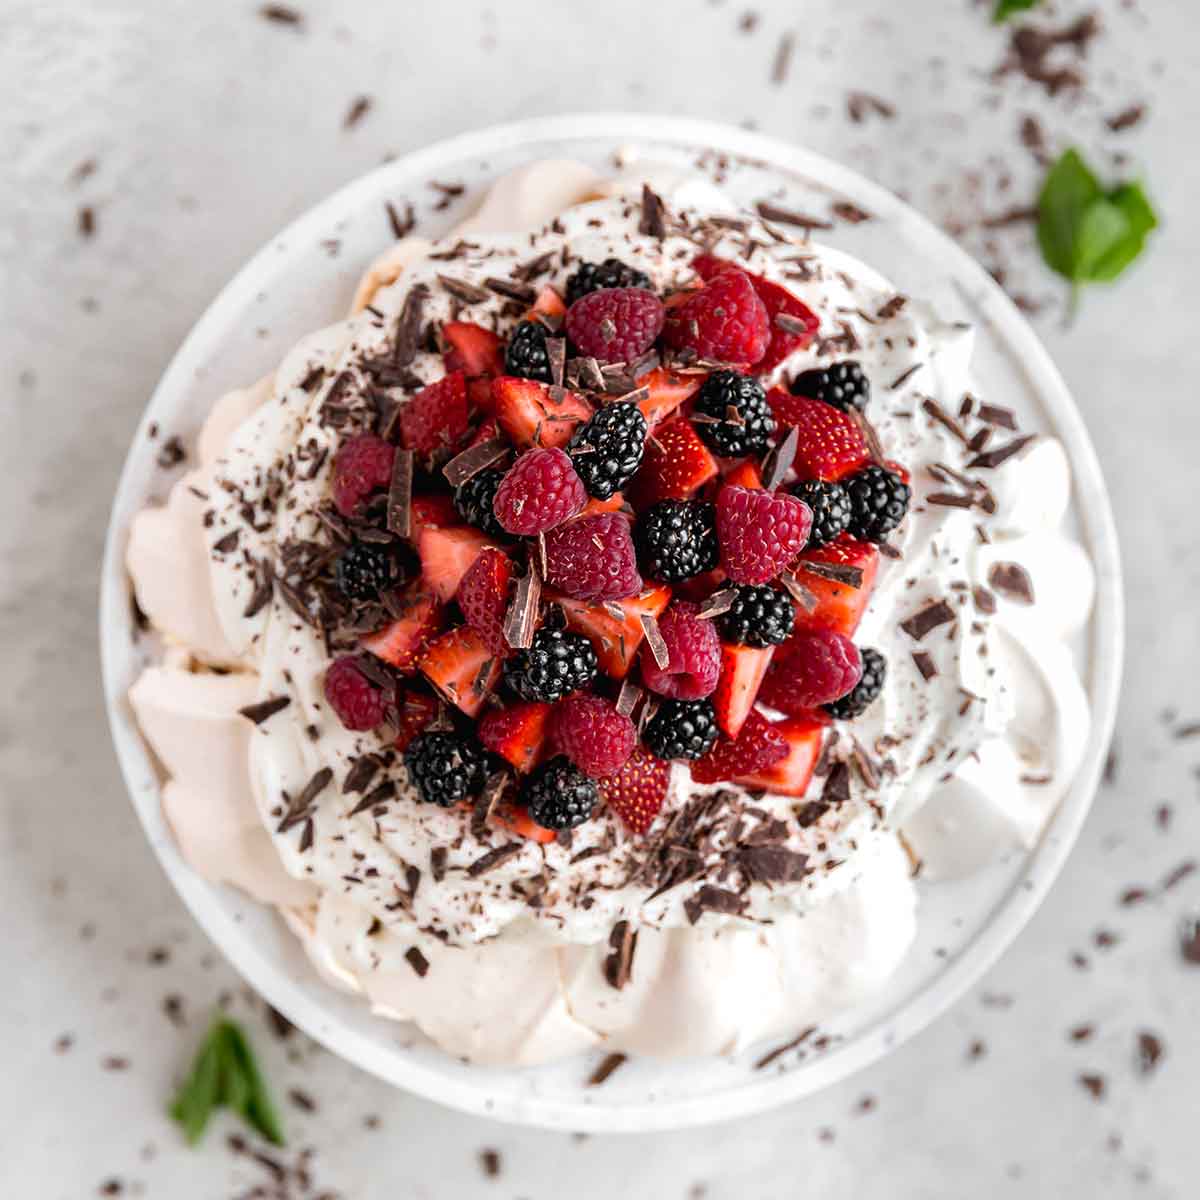 Overhead photo of pavlova topped with whipped cream, fresh berries, and chocolate shavings.